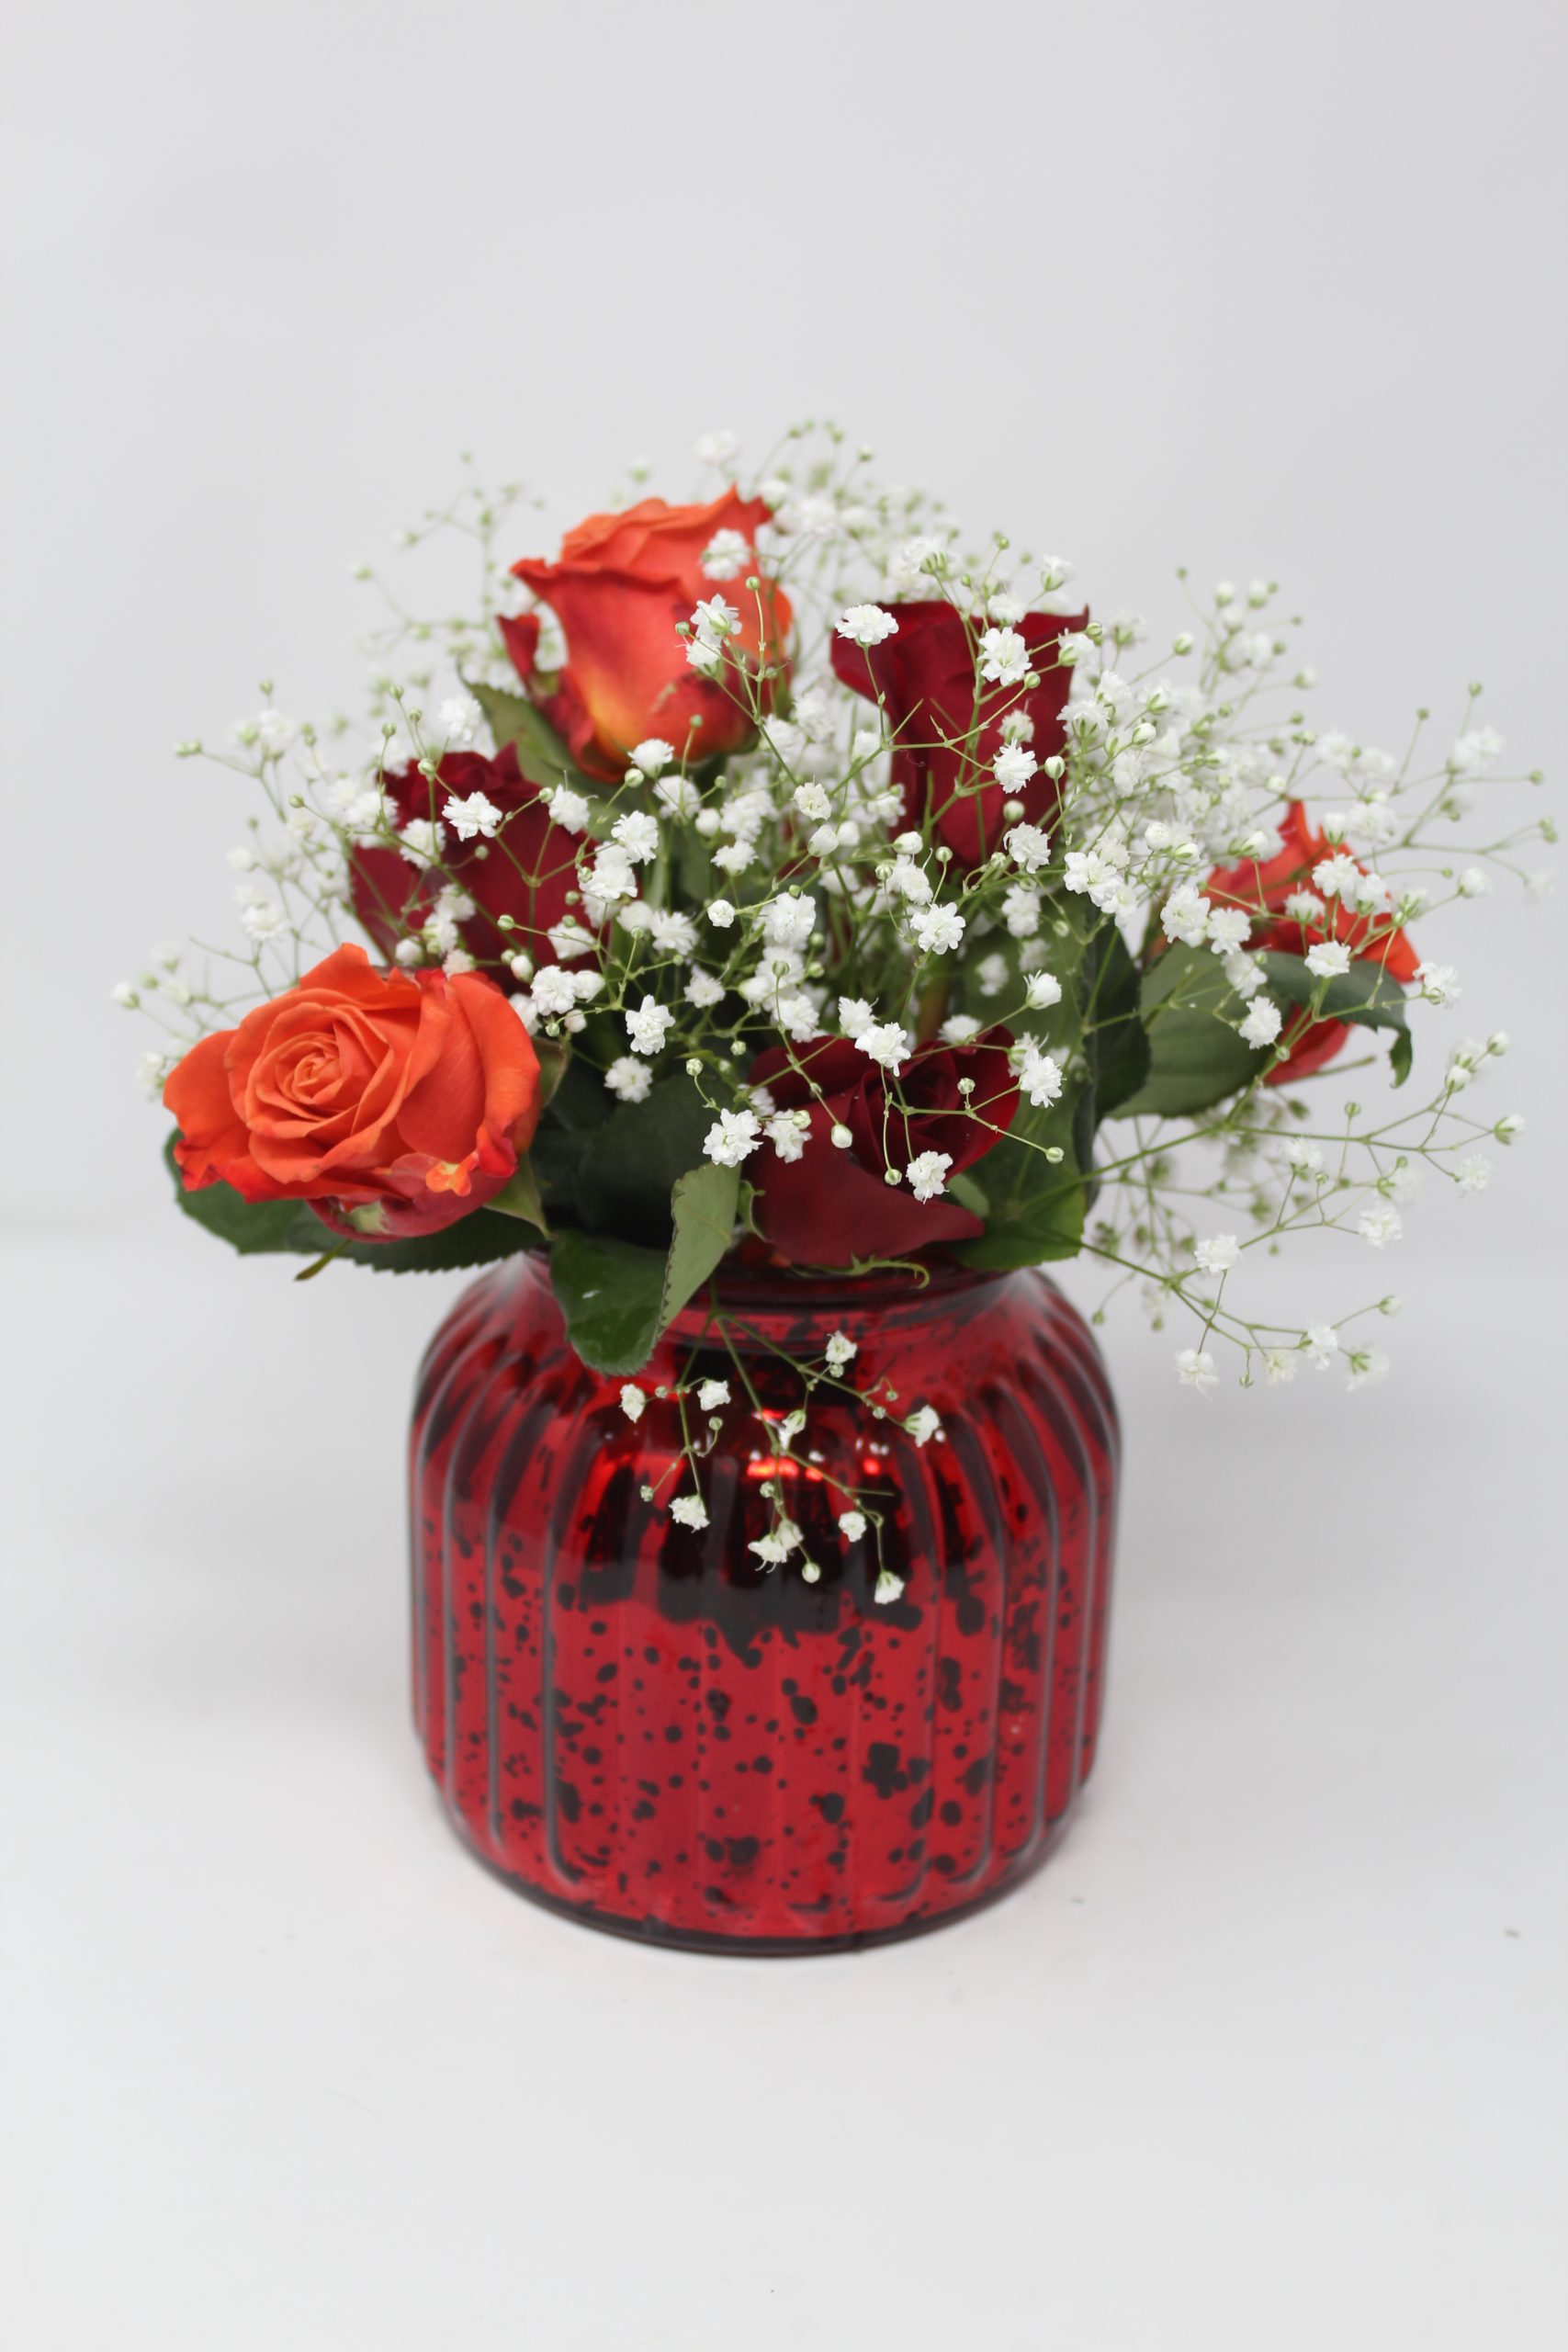 Photo of a small red vase with orange and red roses, and other flowers.